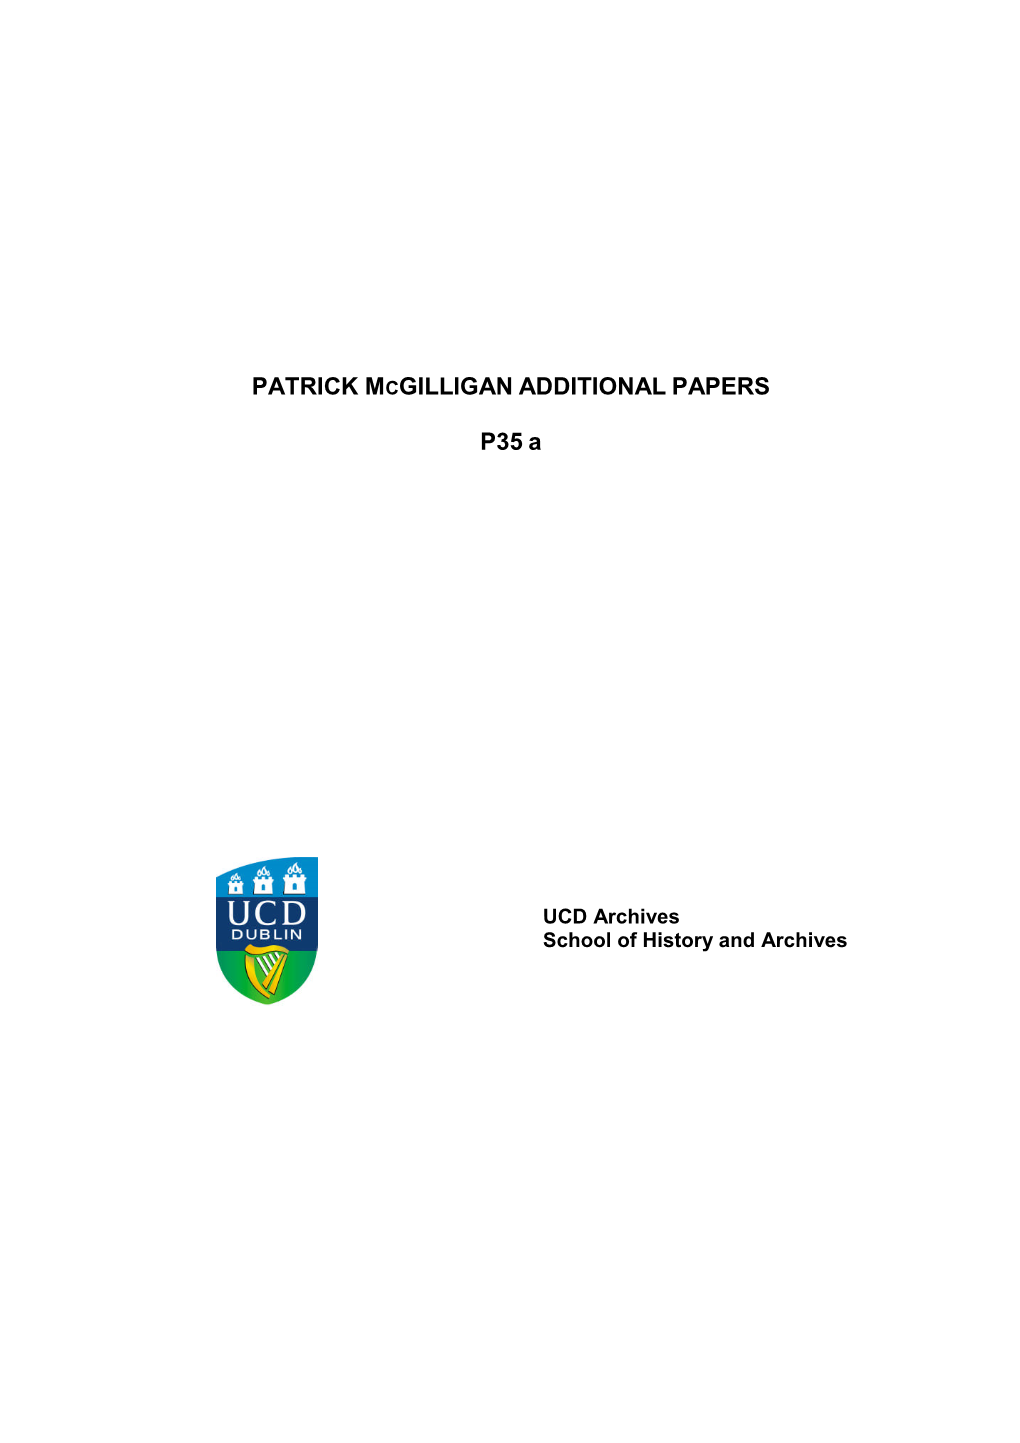 PATRICK MCGILLIGAN ADDITIONAL PAPERS P35 A